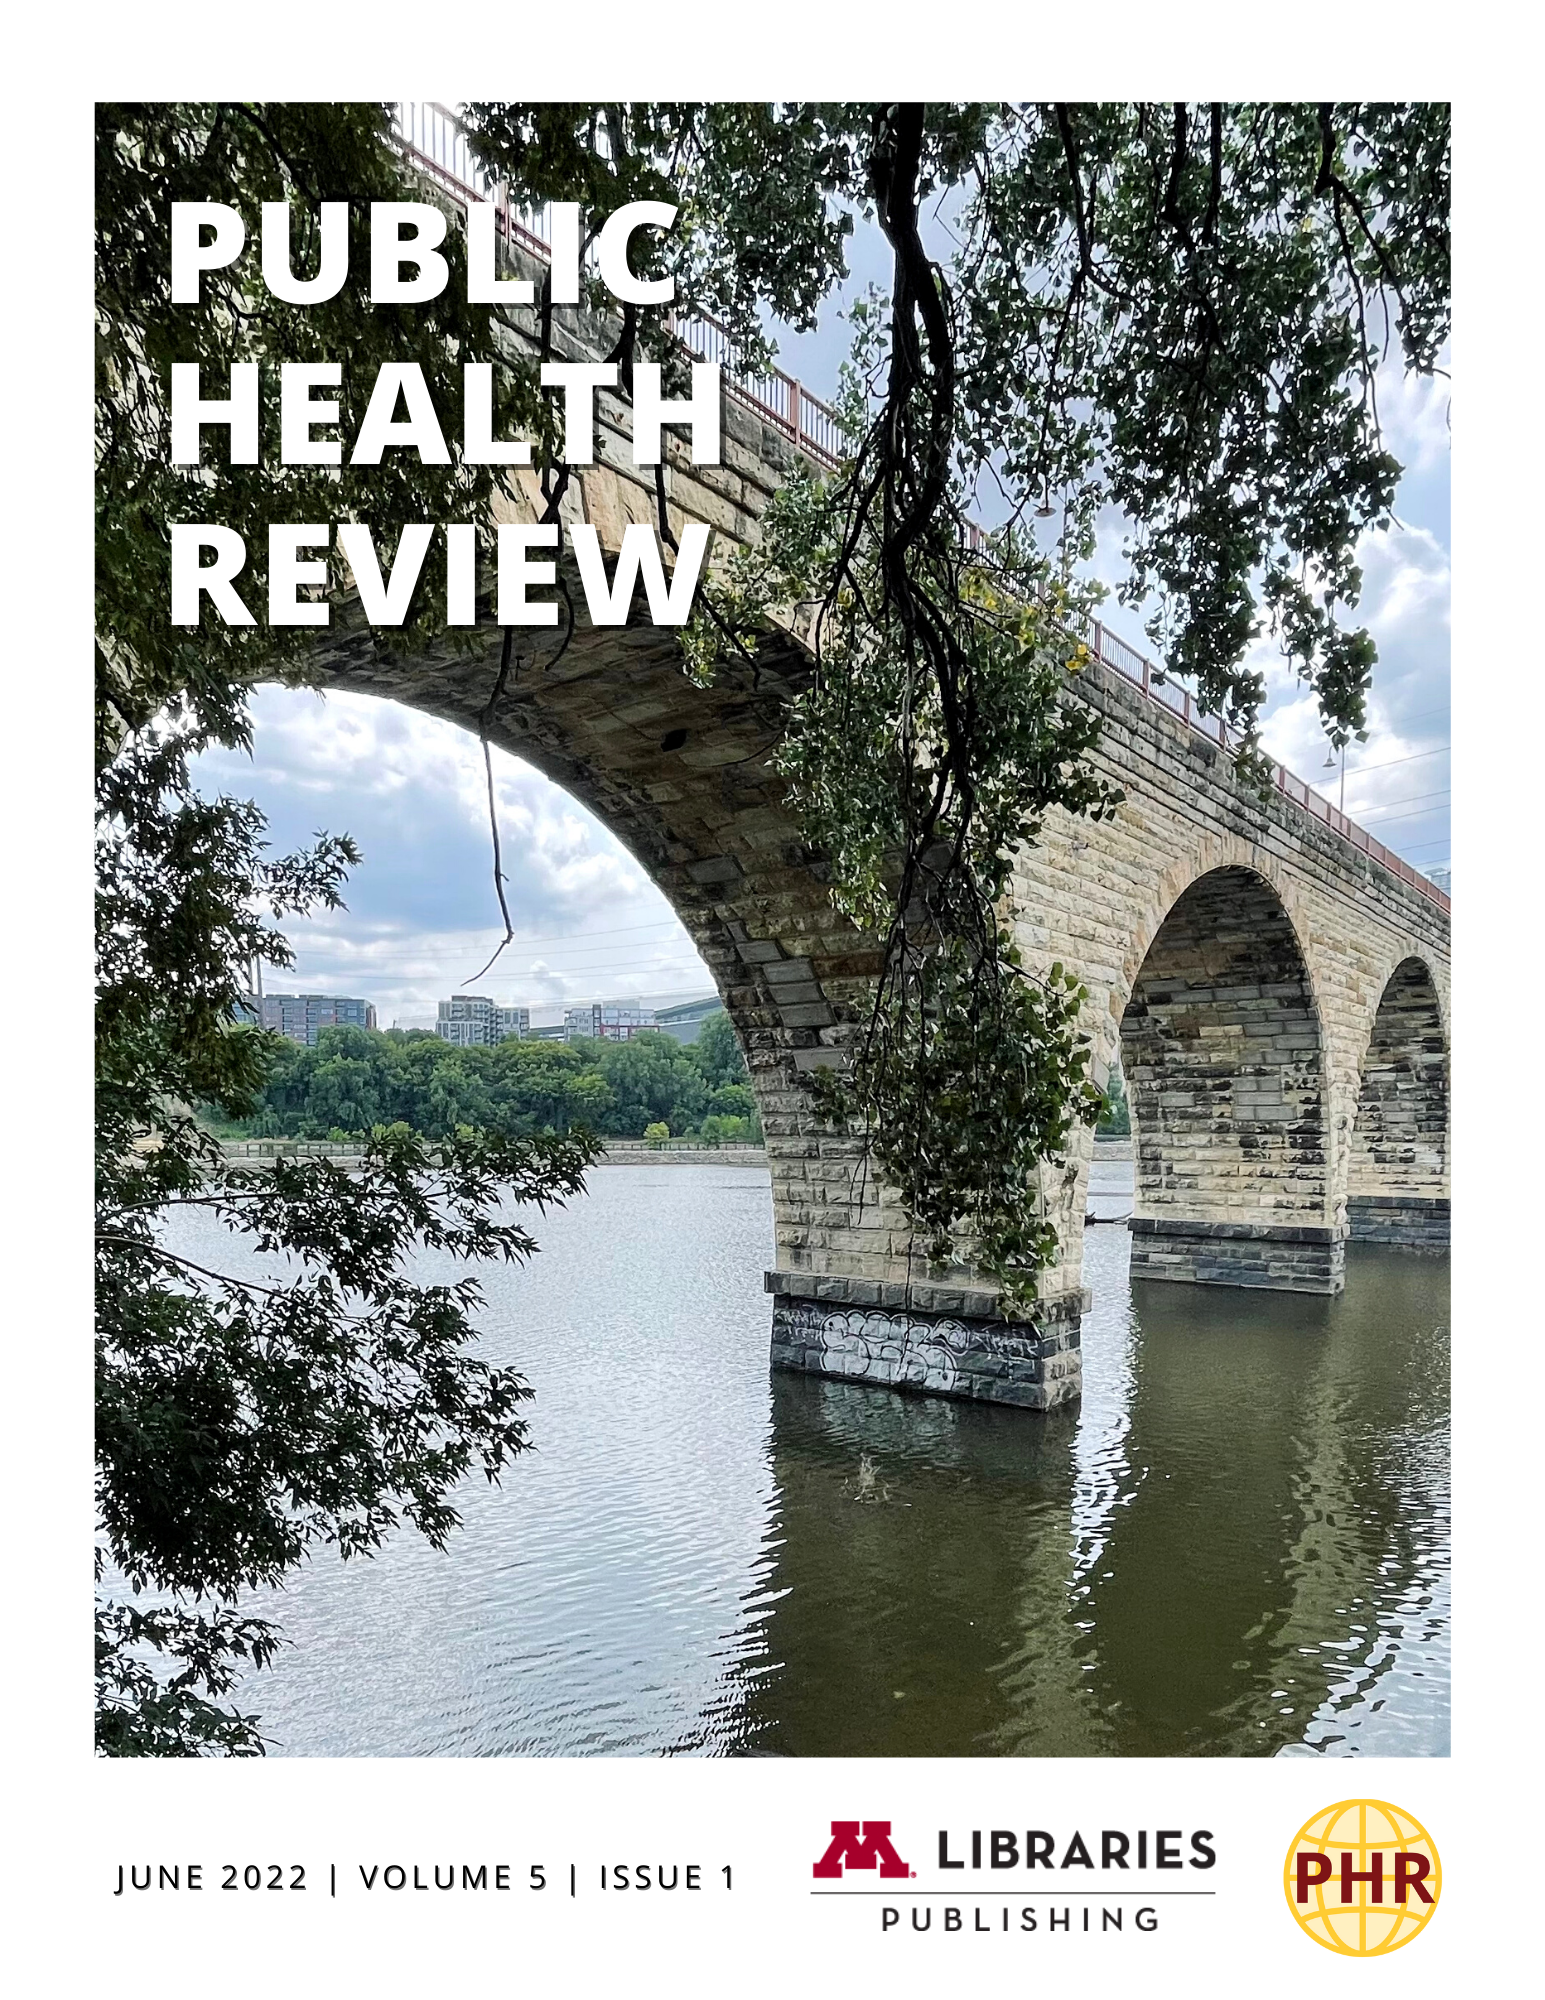 A close-up shot of the Stone Arch Bridge in Minneapolis, Minnesota, with the words "Public Health Review" overlaid. In the bottom margin reads, "june 2022, Volume 5, Issue 1" followed by the M Libraries and Public Health Review logos.